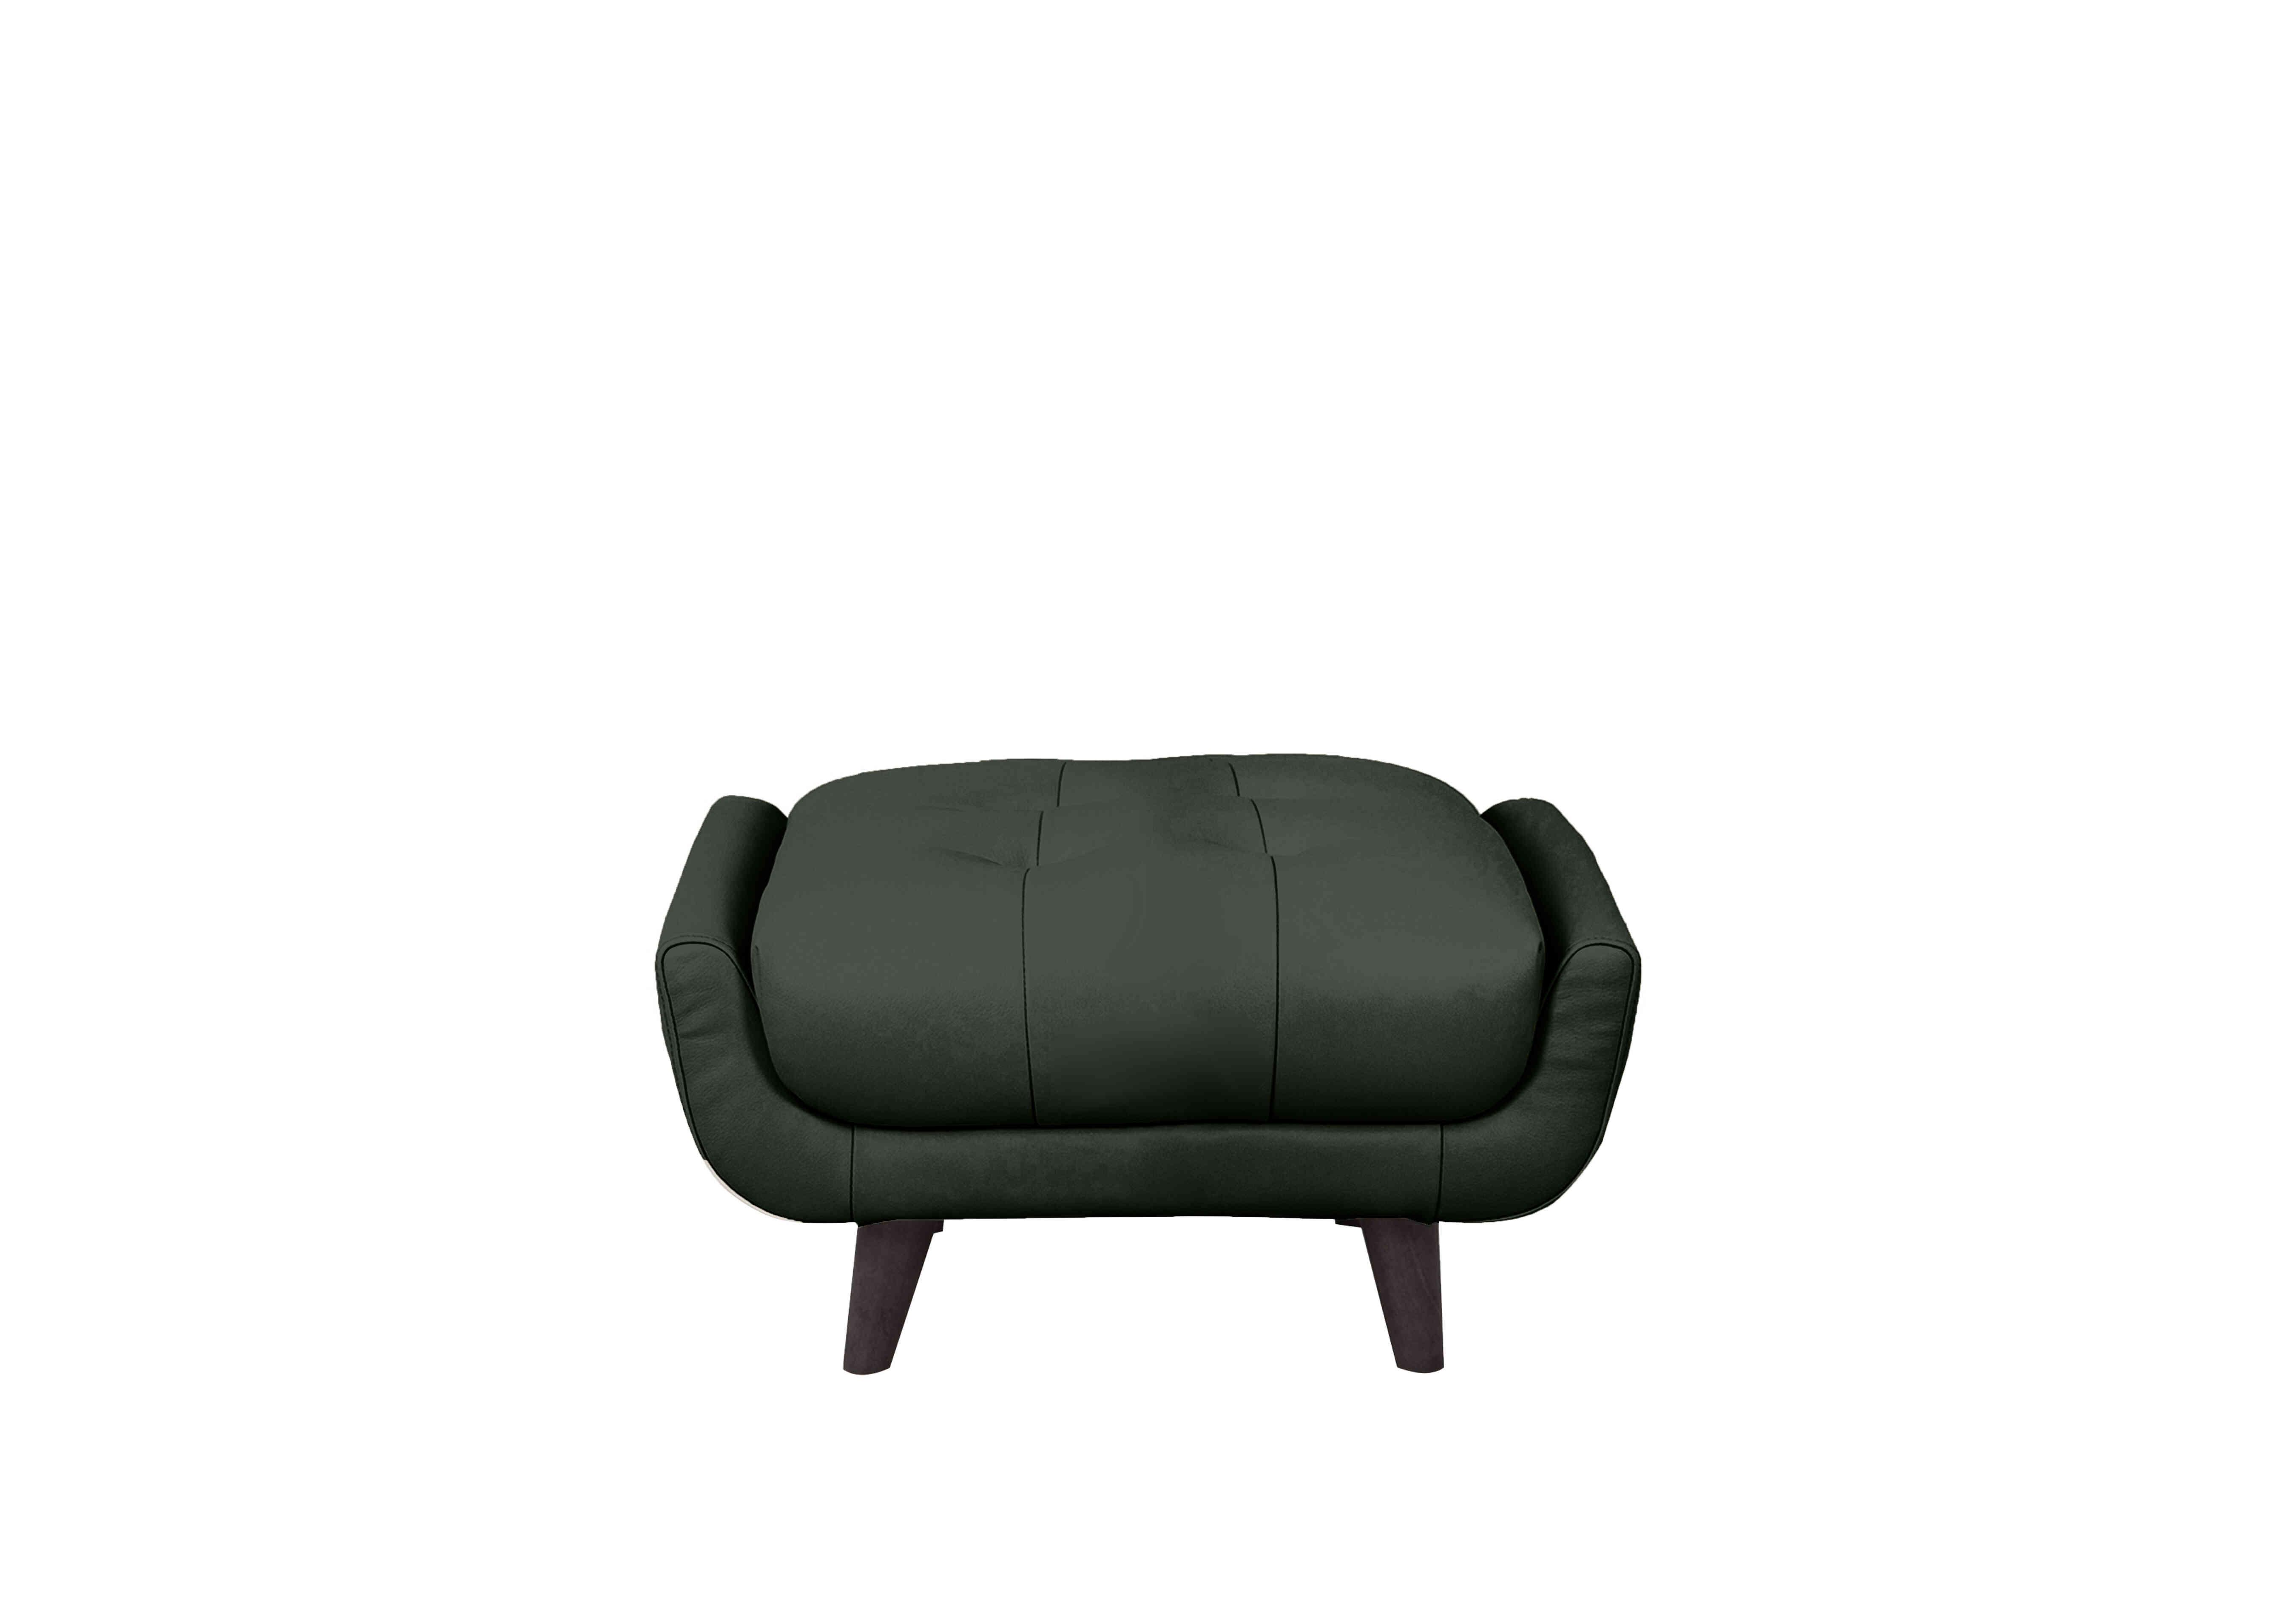 Rene Small Leather Footstool in Montana Oslo Pine on Furniture Village